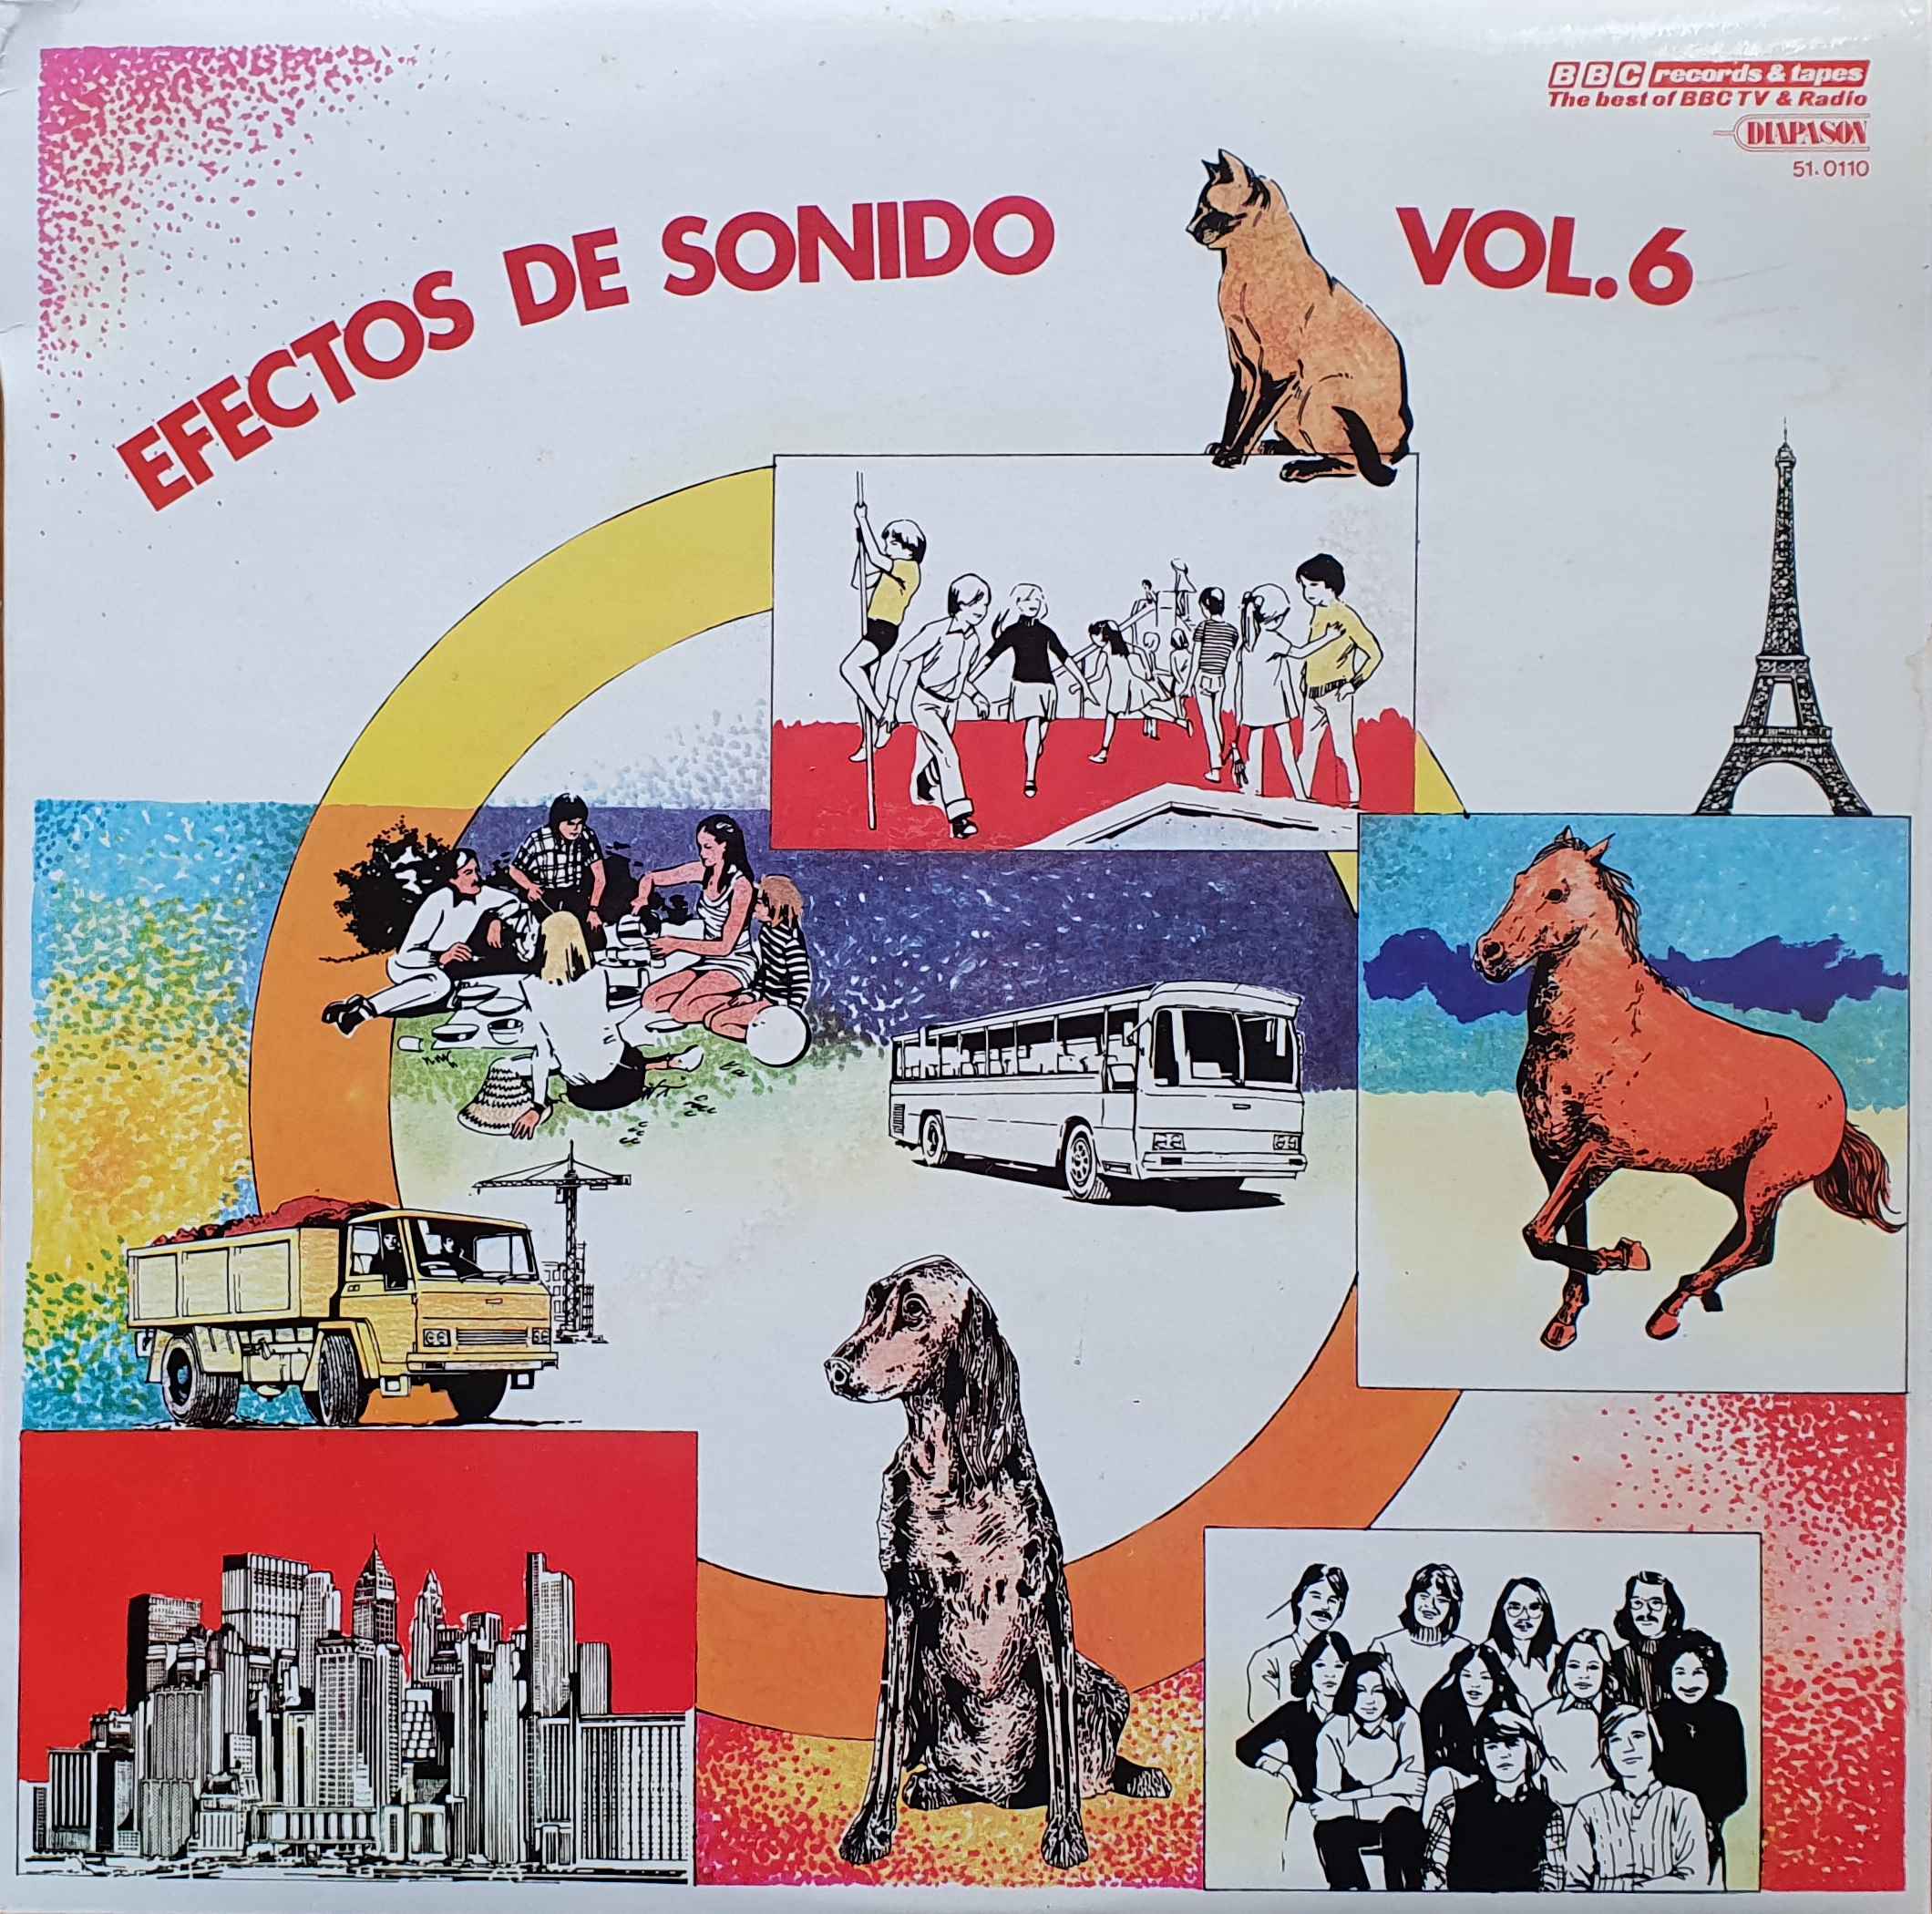 Picture of 51.0110 Efectos de sonido No 6 (Spanish import) by artist Various from the BBC albums - Records and Tapes library